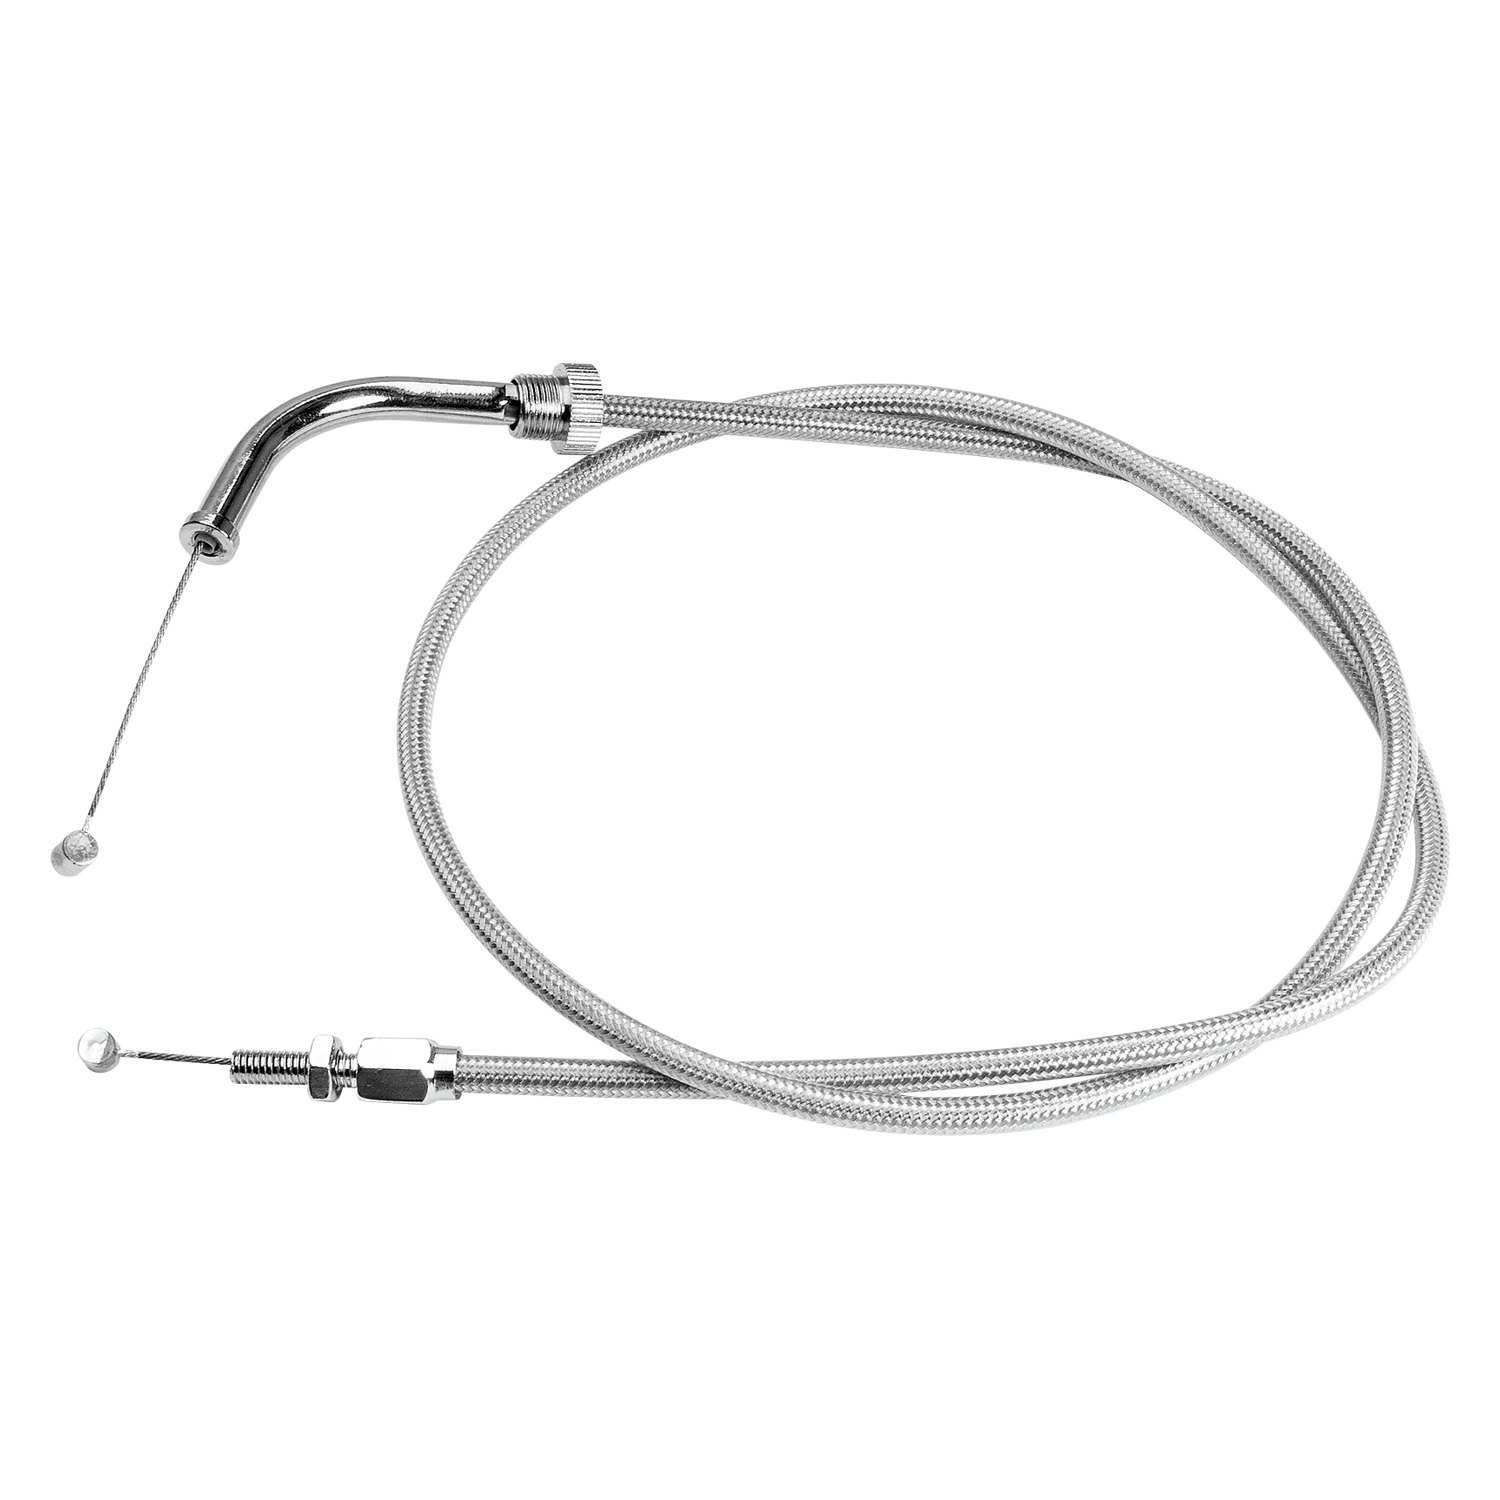 Armor Coat Stainless Steel Push Throttle Cable 62-0428 Motion Pro